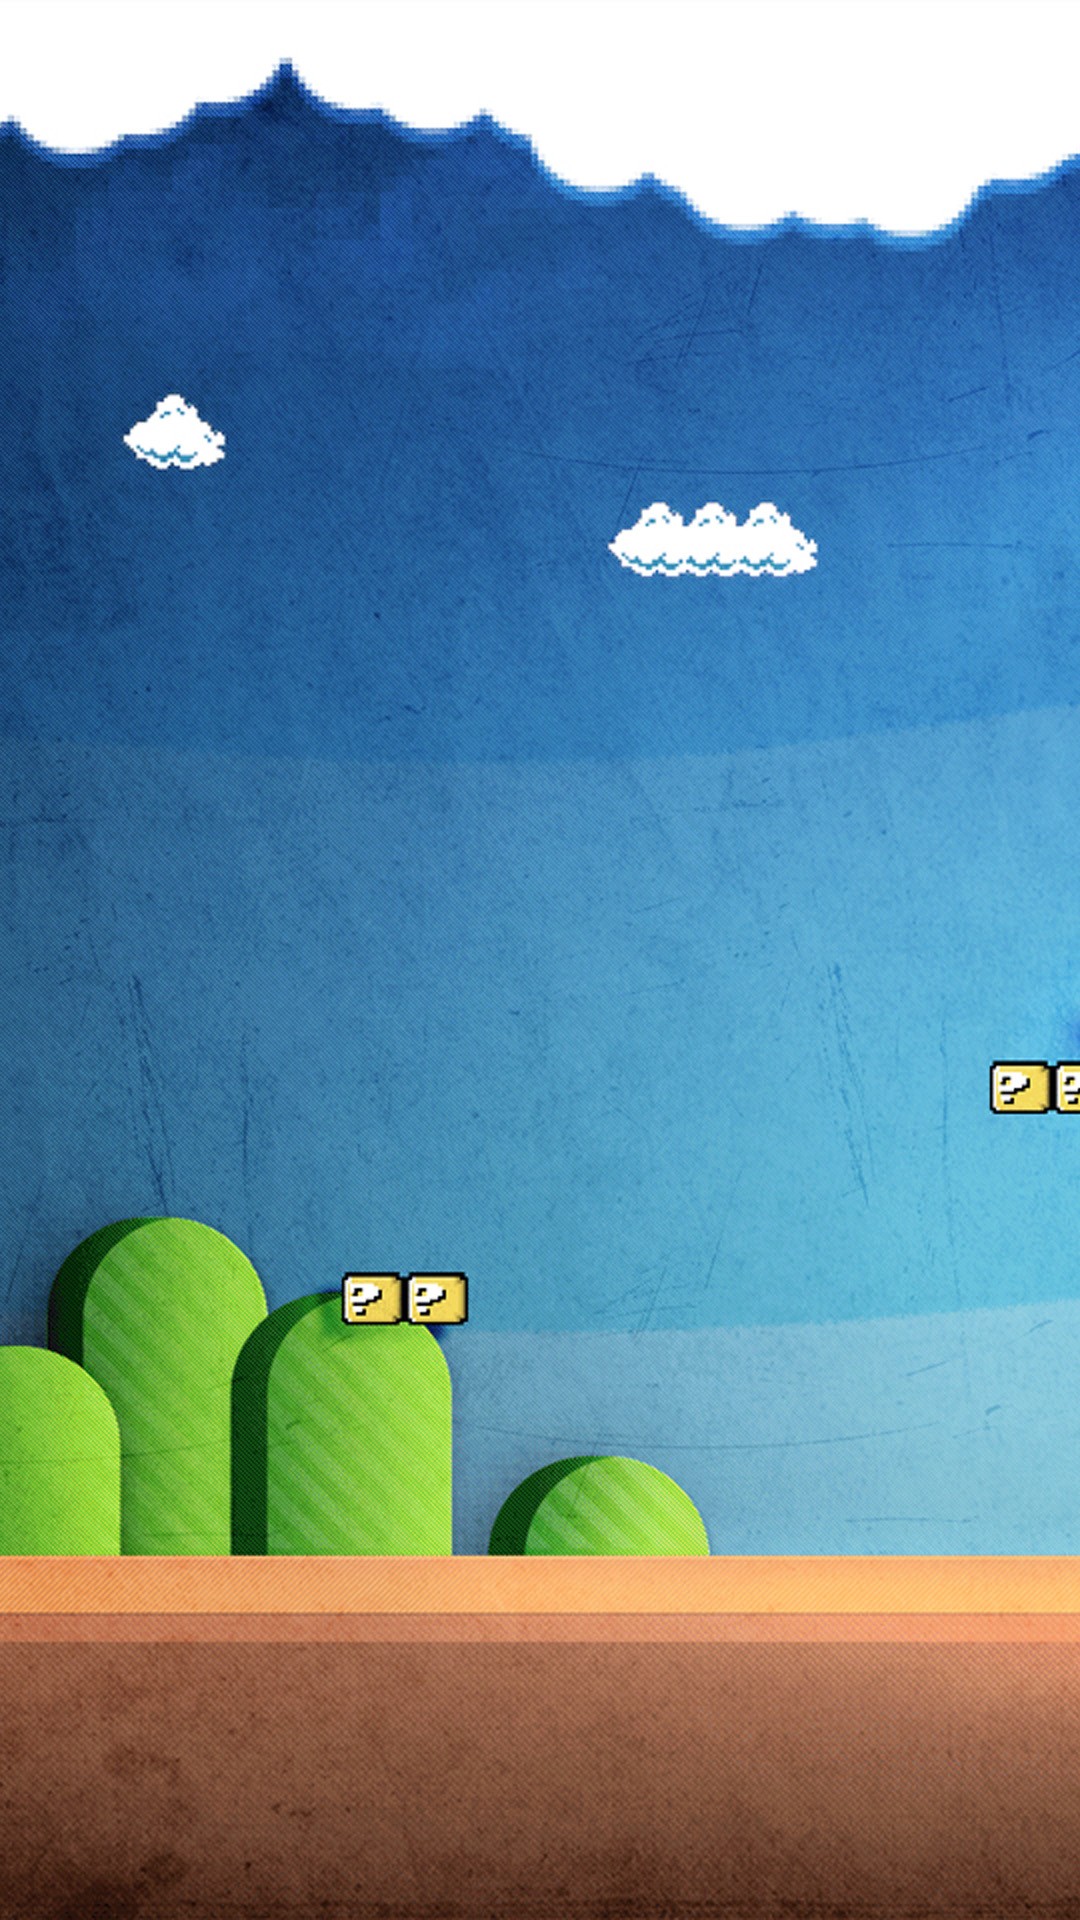 Super Mario wallpaper ·① Download free cool wallpapers for ...